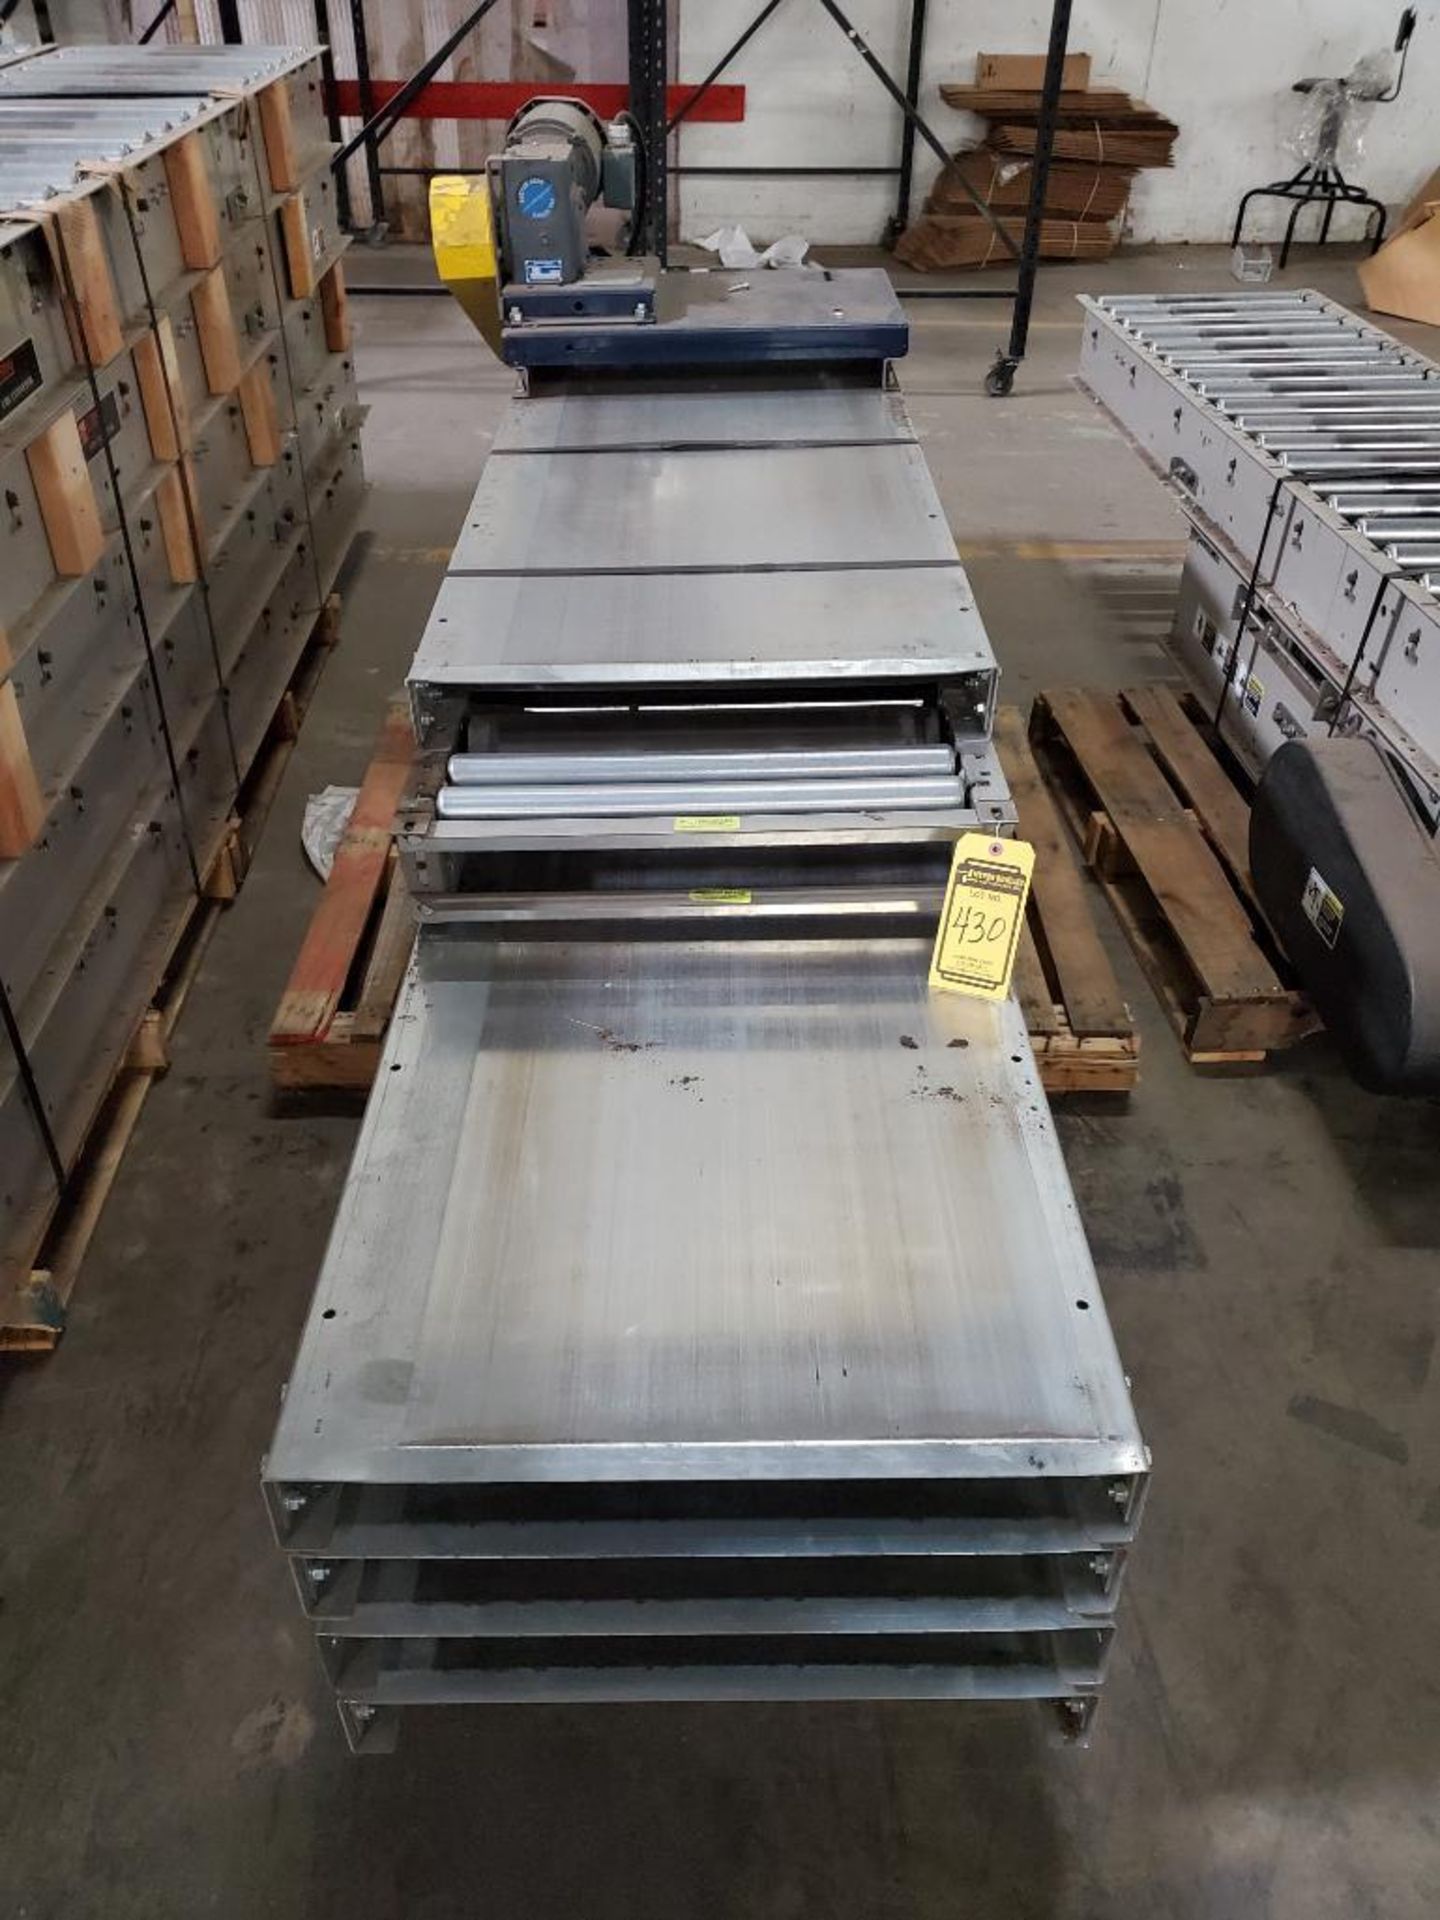 (6x) Global Slider Conveyor ($35 Loading fee will be added to buyers invoice)